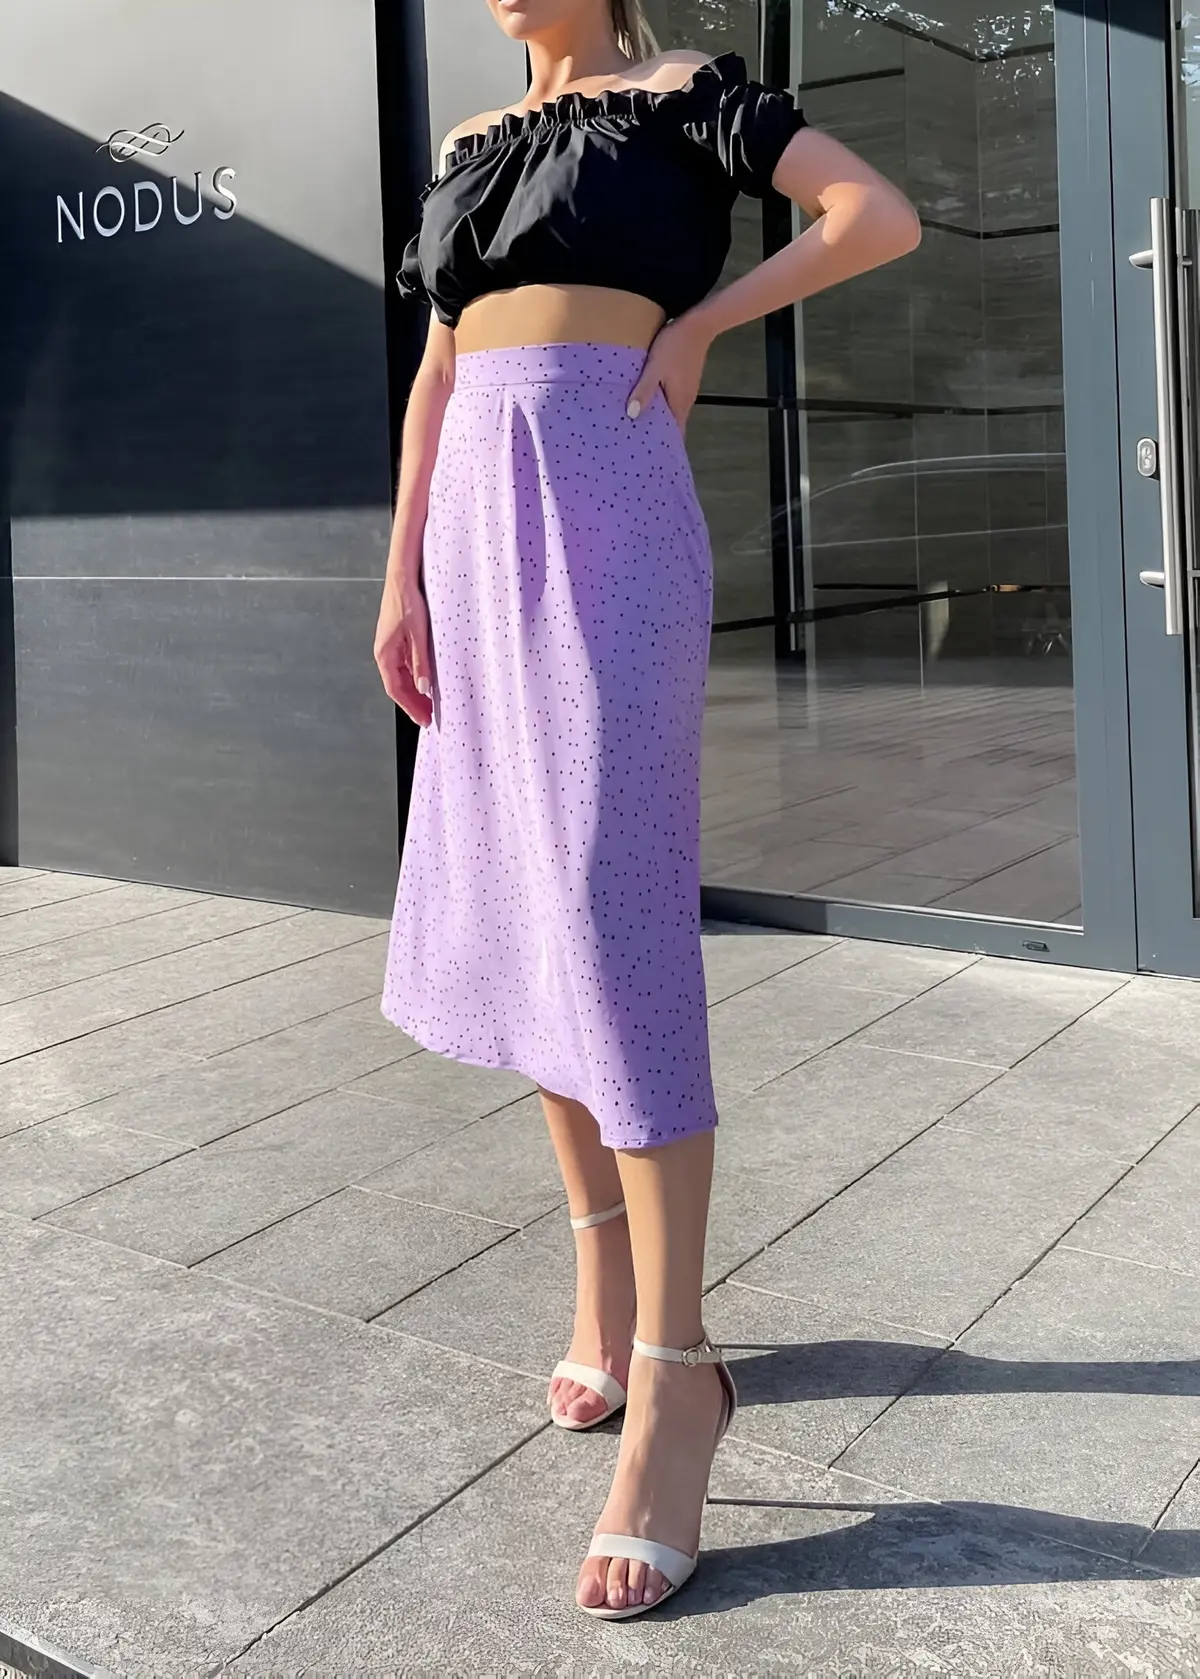 lavender skirt outfit for summer night out